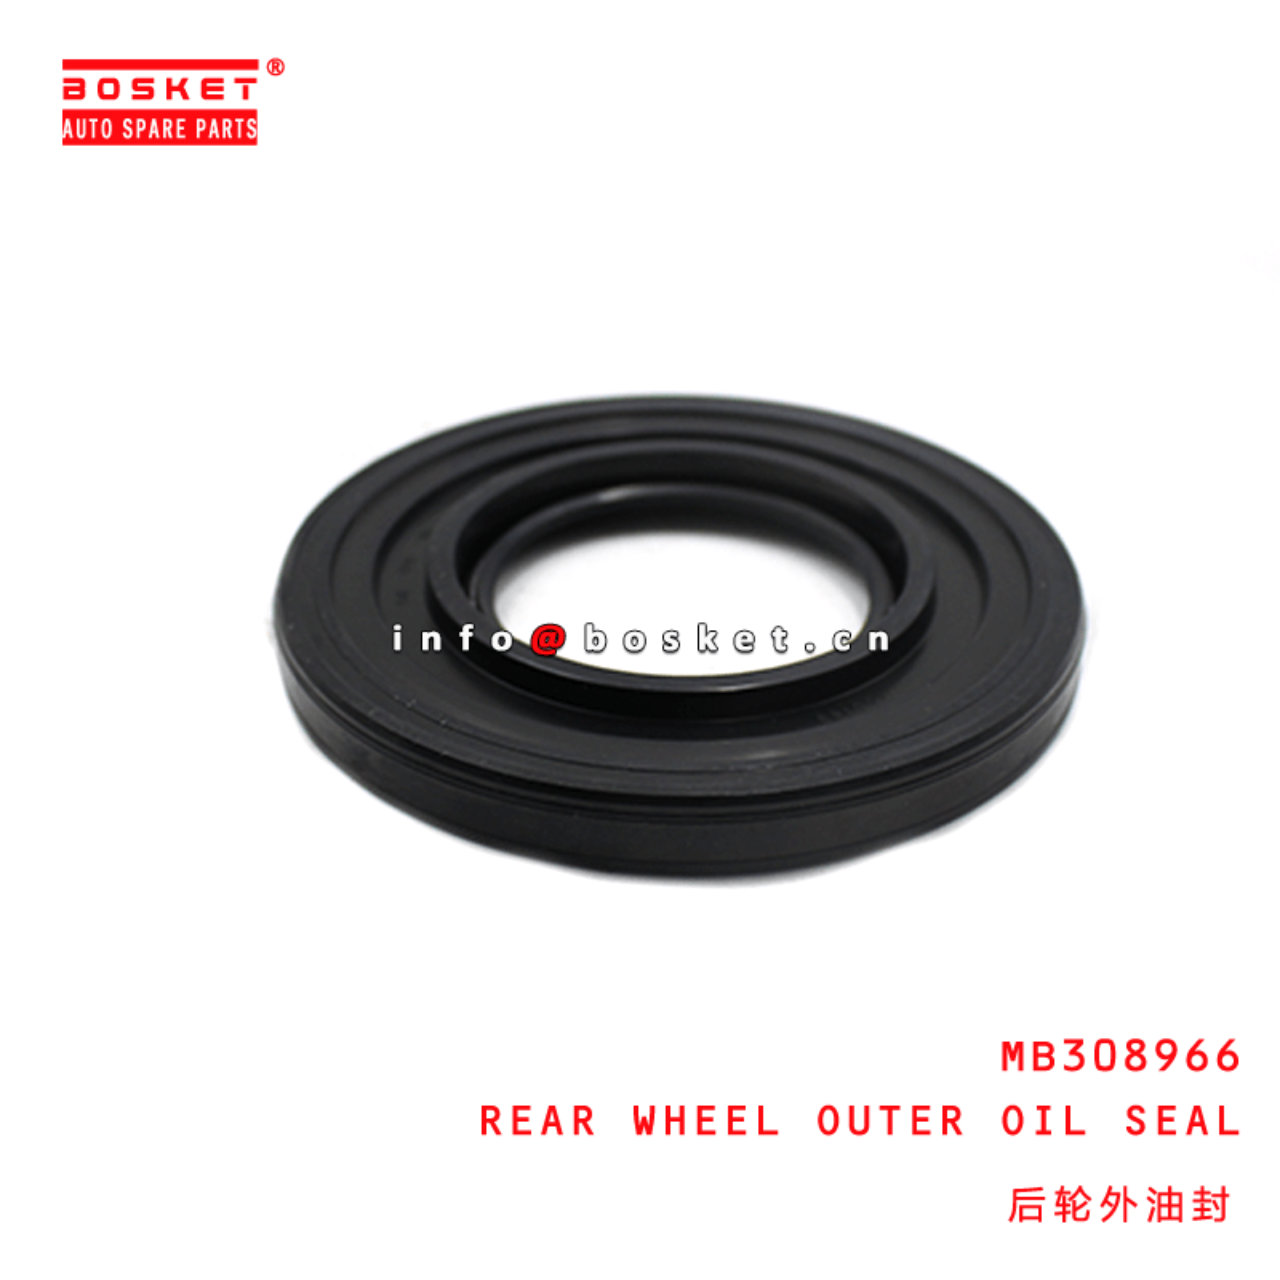 MB308966 Rear Wheel Outer Oil Seal Suitable For MITSUBISHI FUSO CANTER RUS